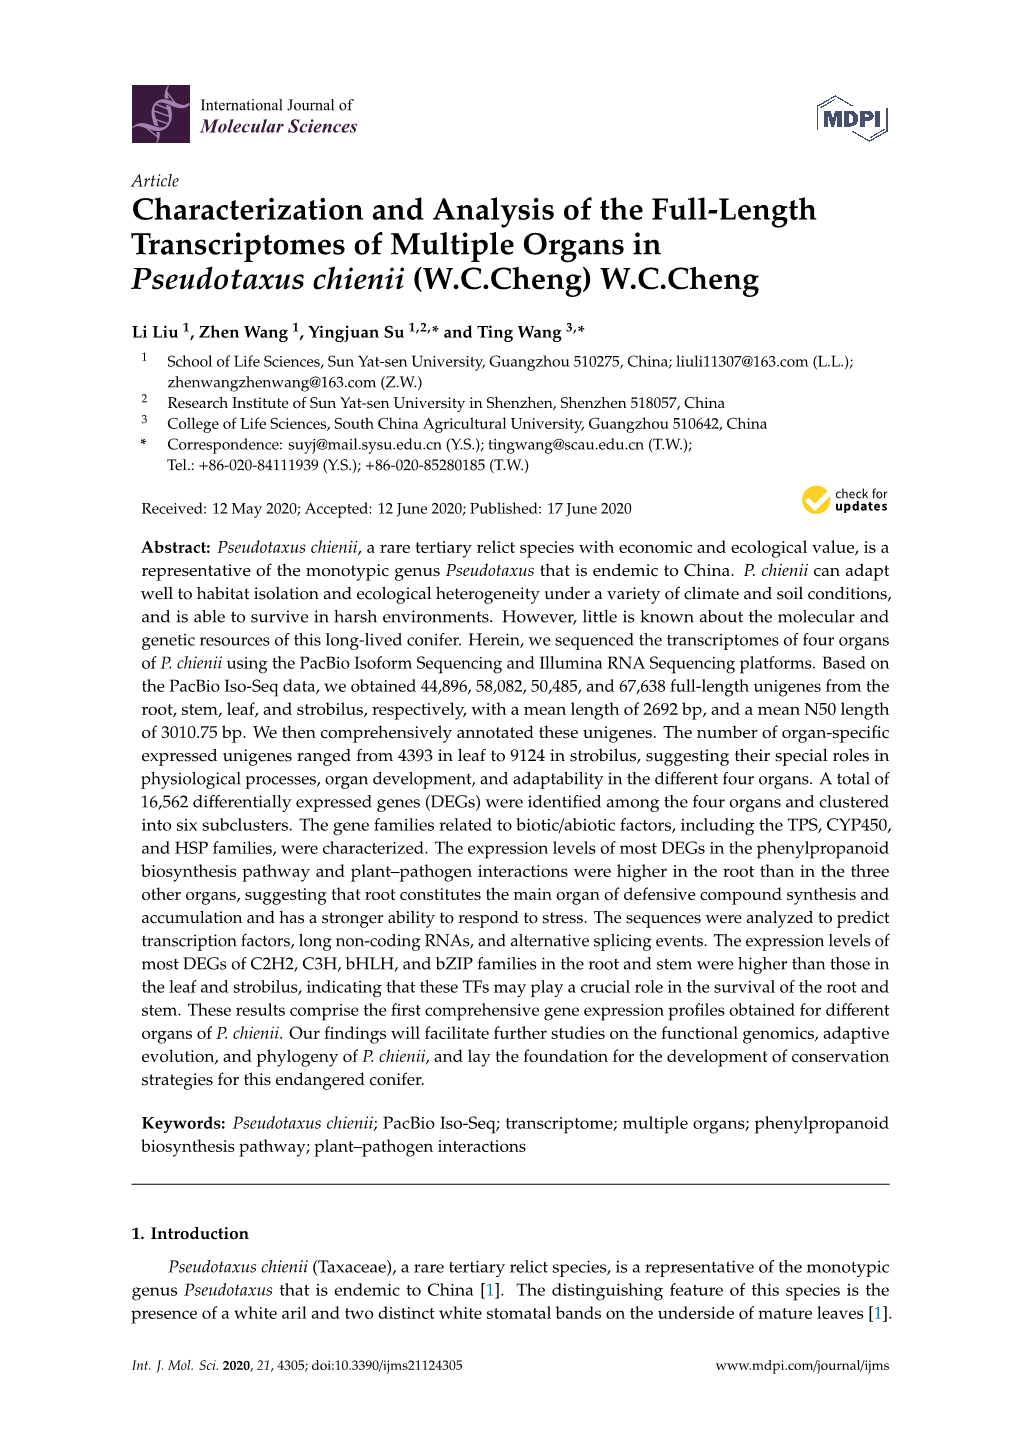 Characterization and Analysis of the Full-Length Transcriptomes of Multiple Organs in Pseudotaxus Chienii (W.C.Cheng) W.C.Cheng